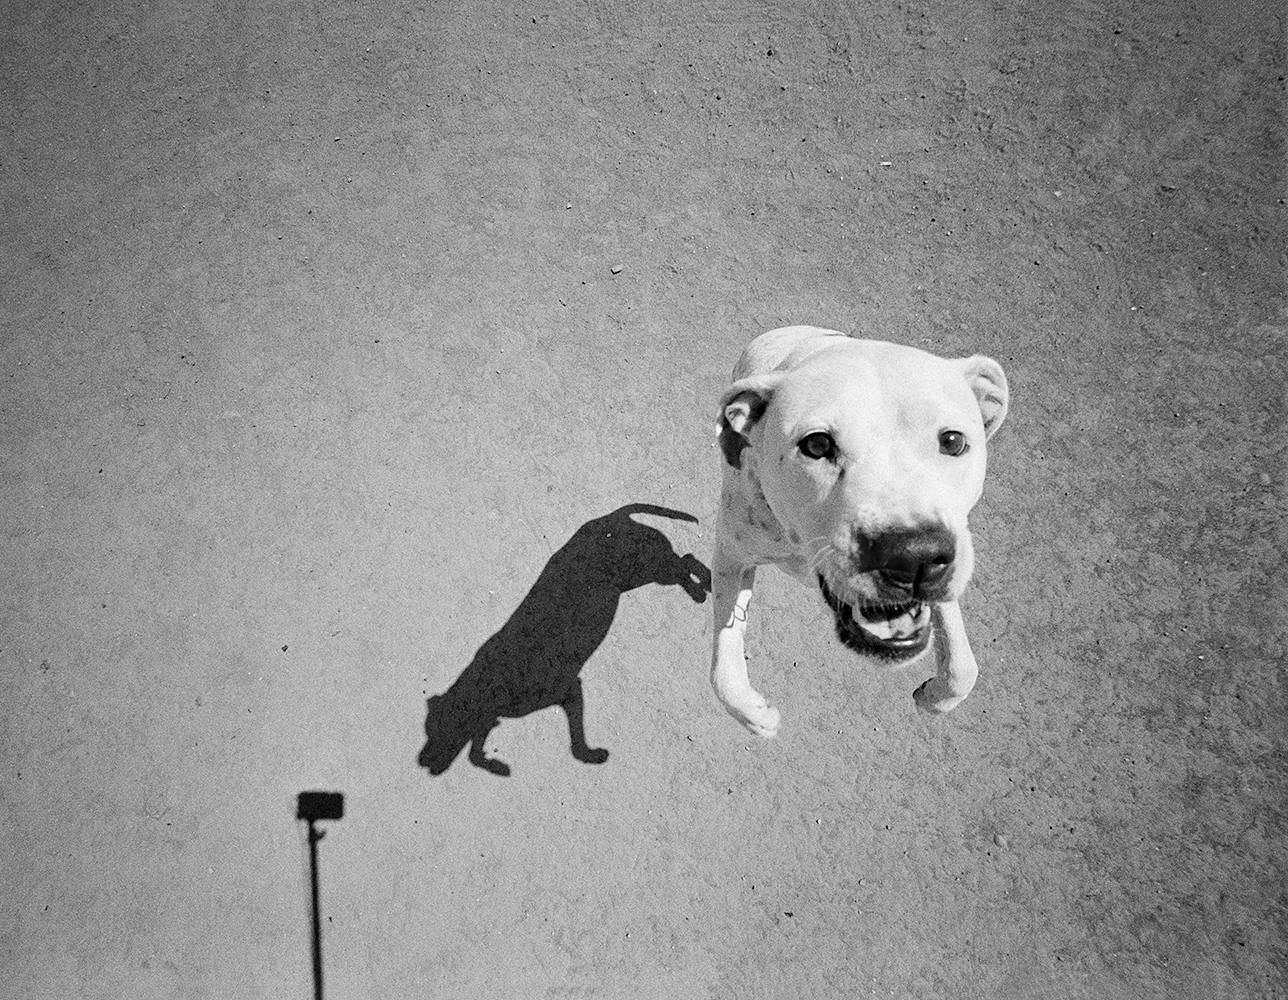  Thomas Roma,  Untitled  from the series  Plato’s Dogs,  2011–2013 